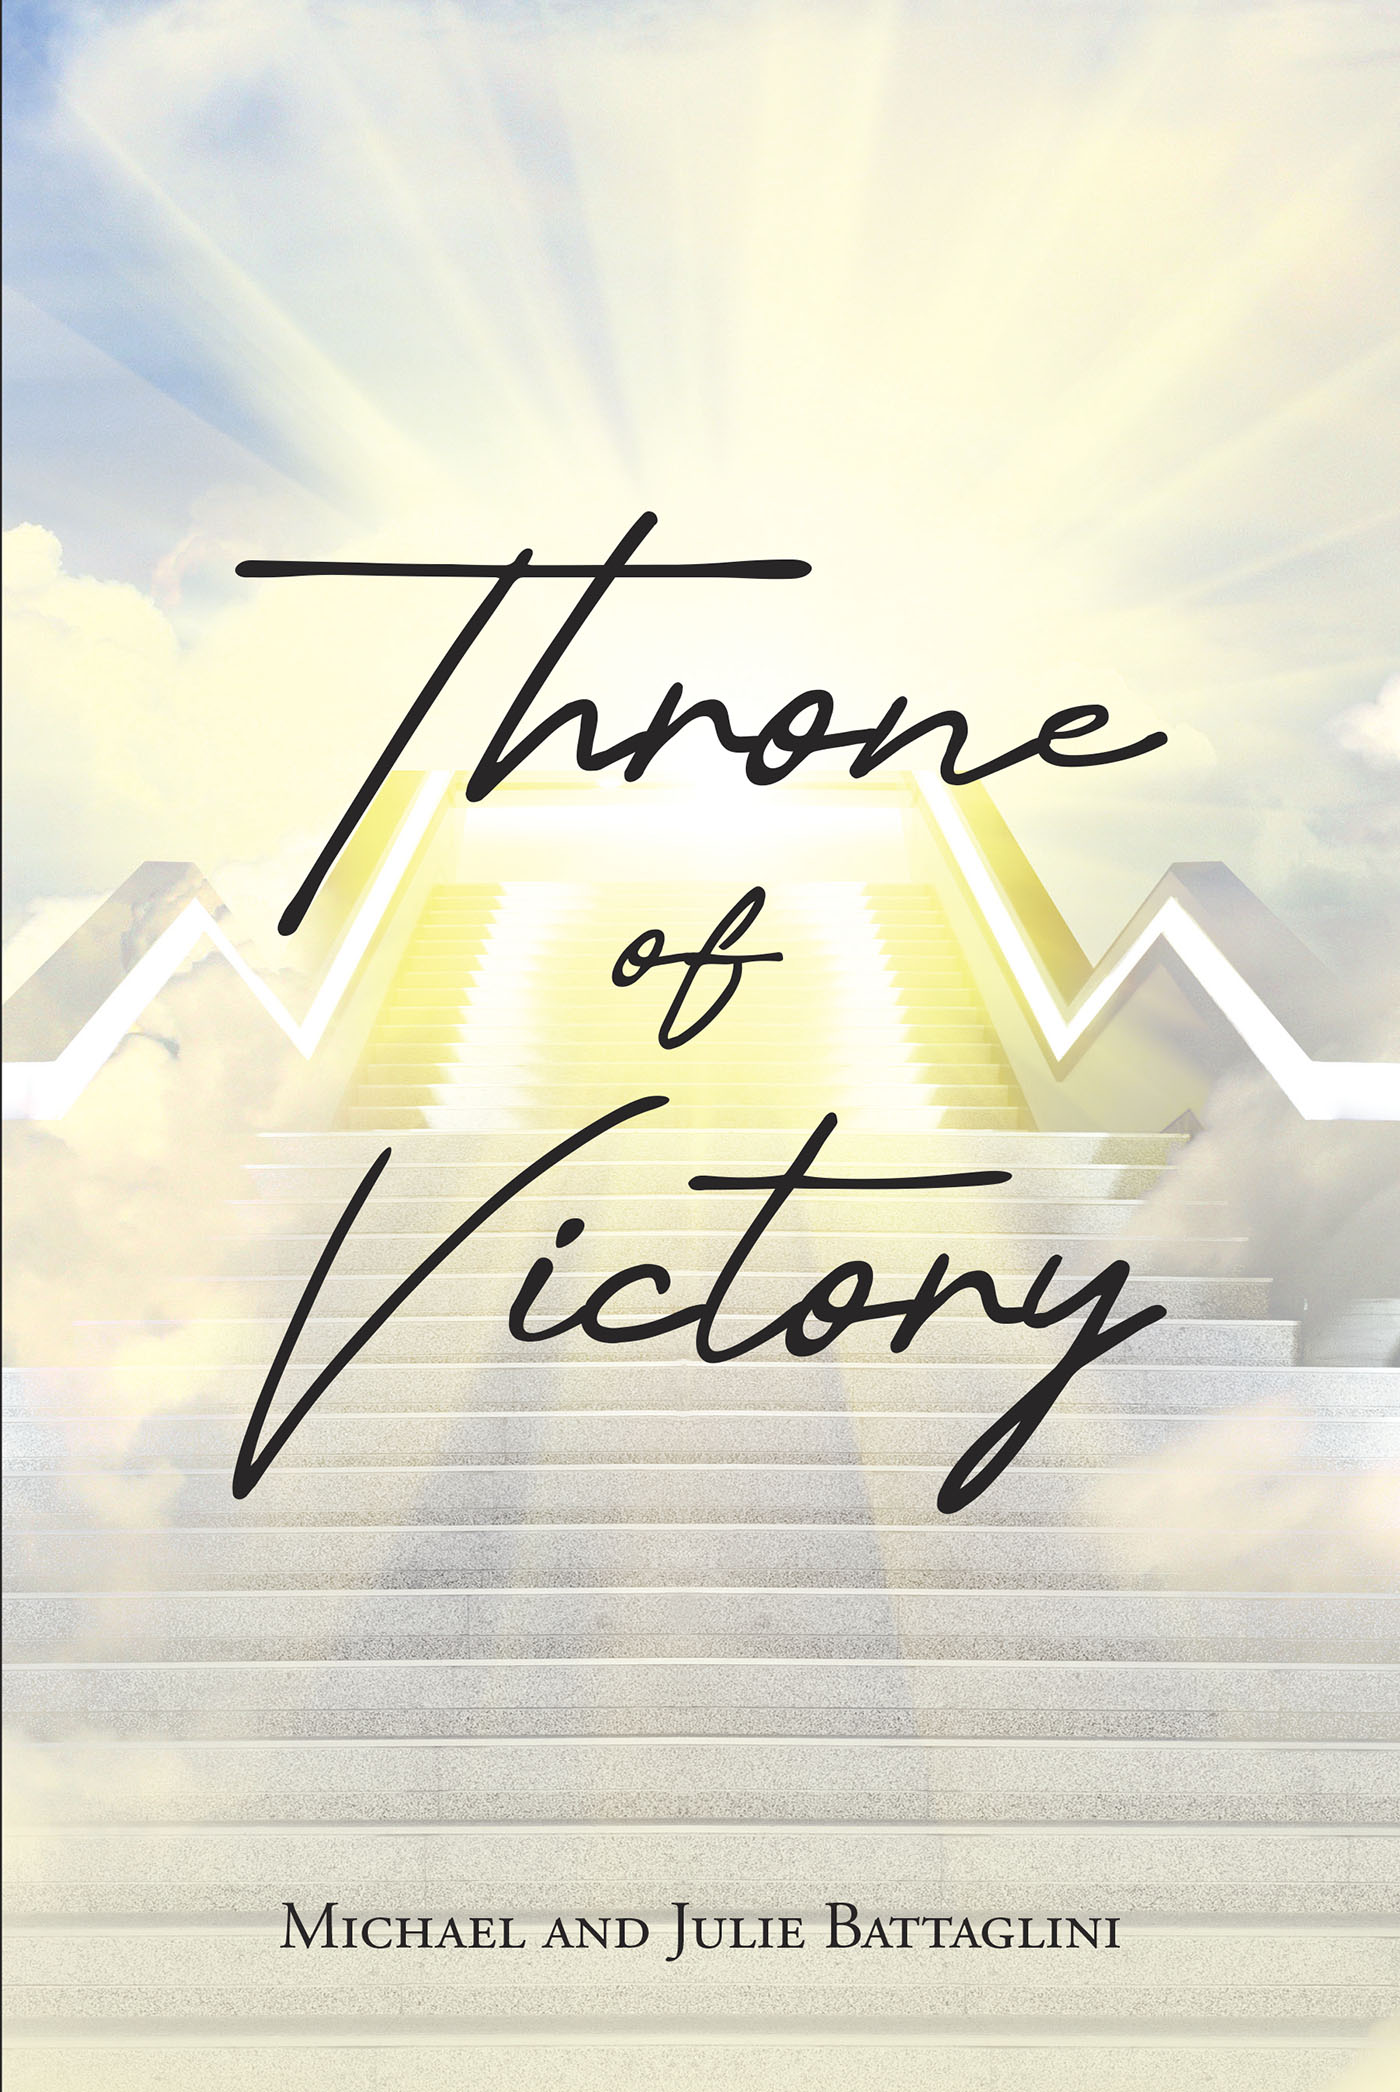 Michael and Julie Battaglini’s Newly Released "Throne of Victory" is an Inspiring Celebration of All That God Promises